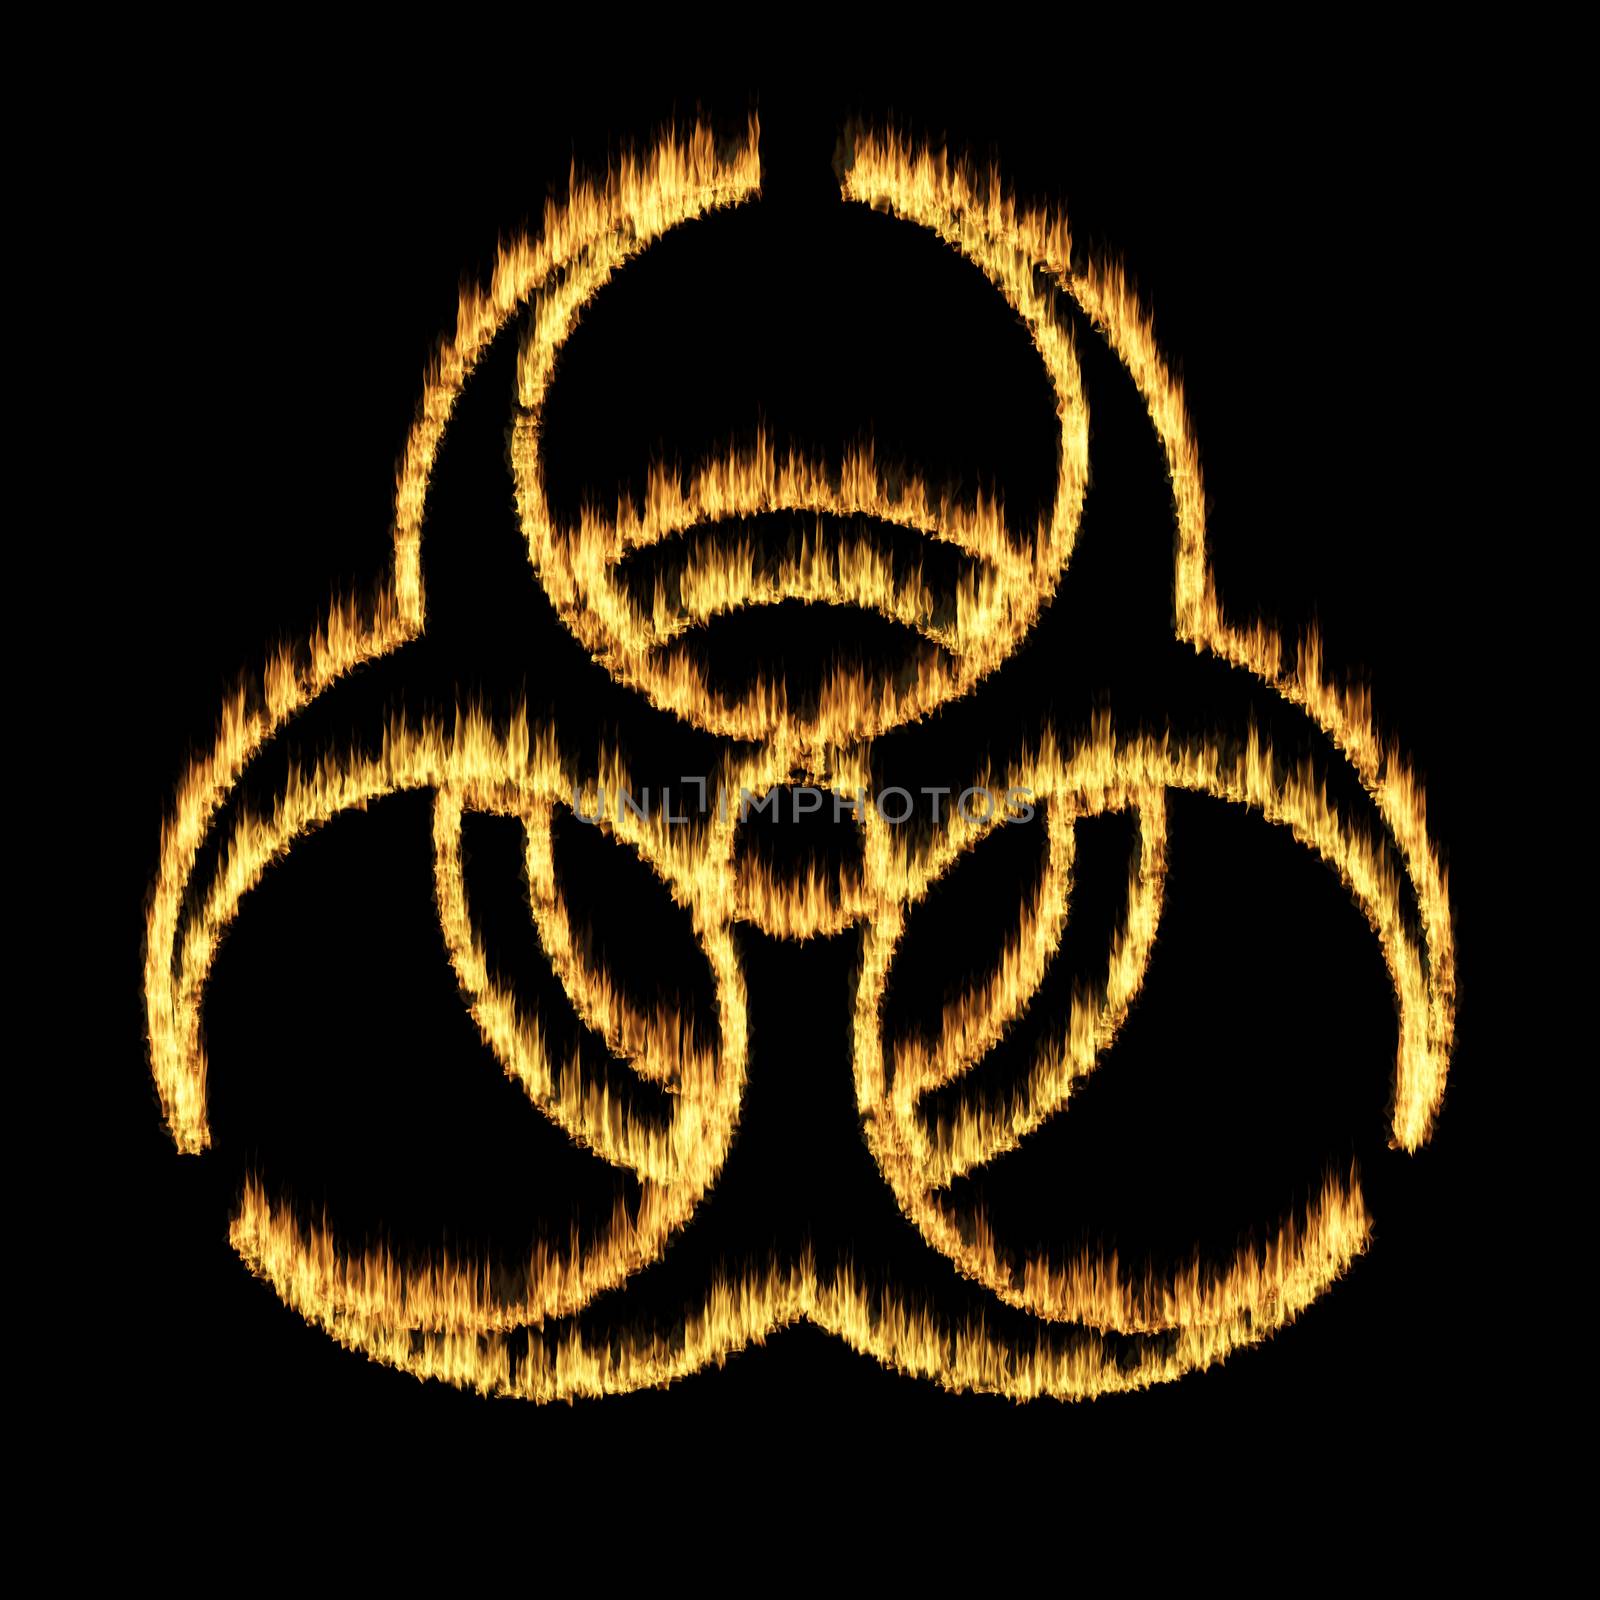 Warning symbol of a biohazard sign from flames by Mibuch